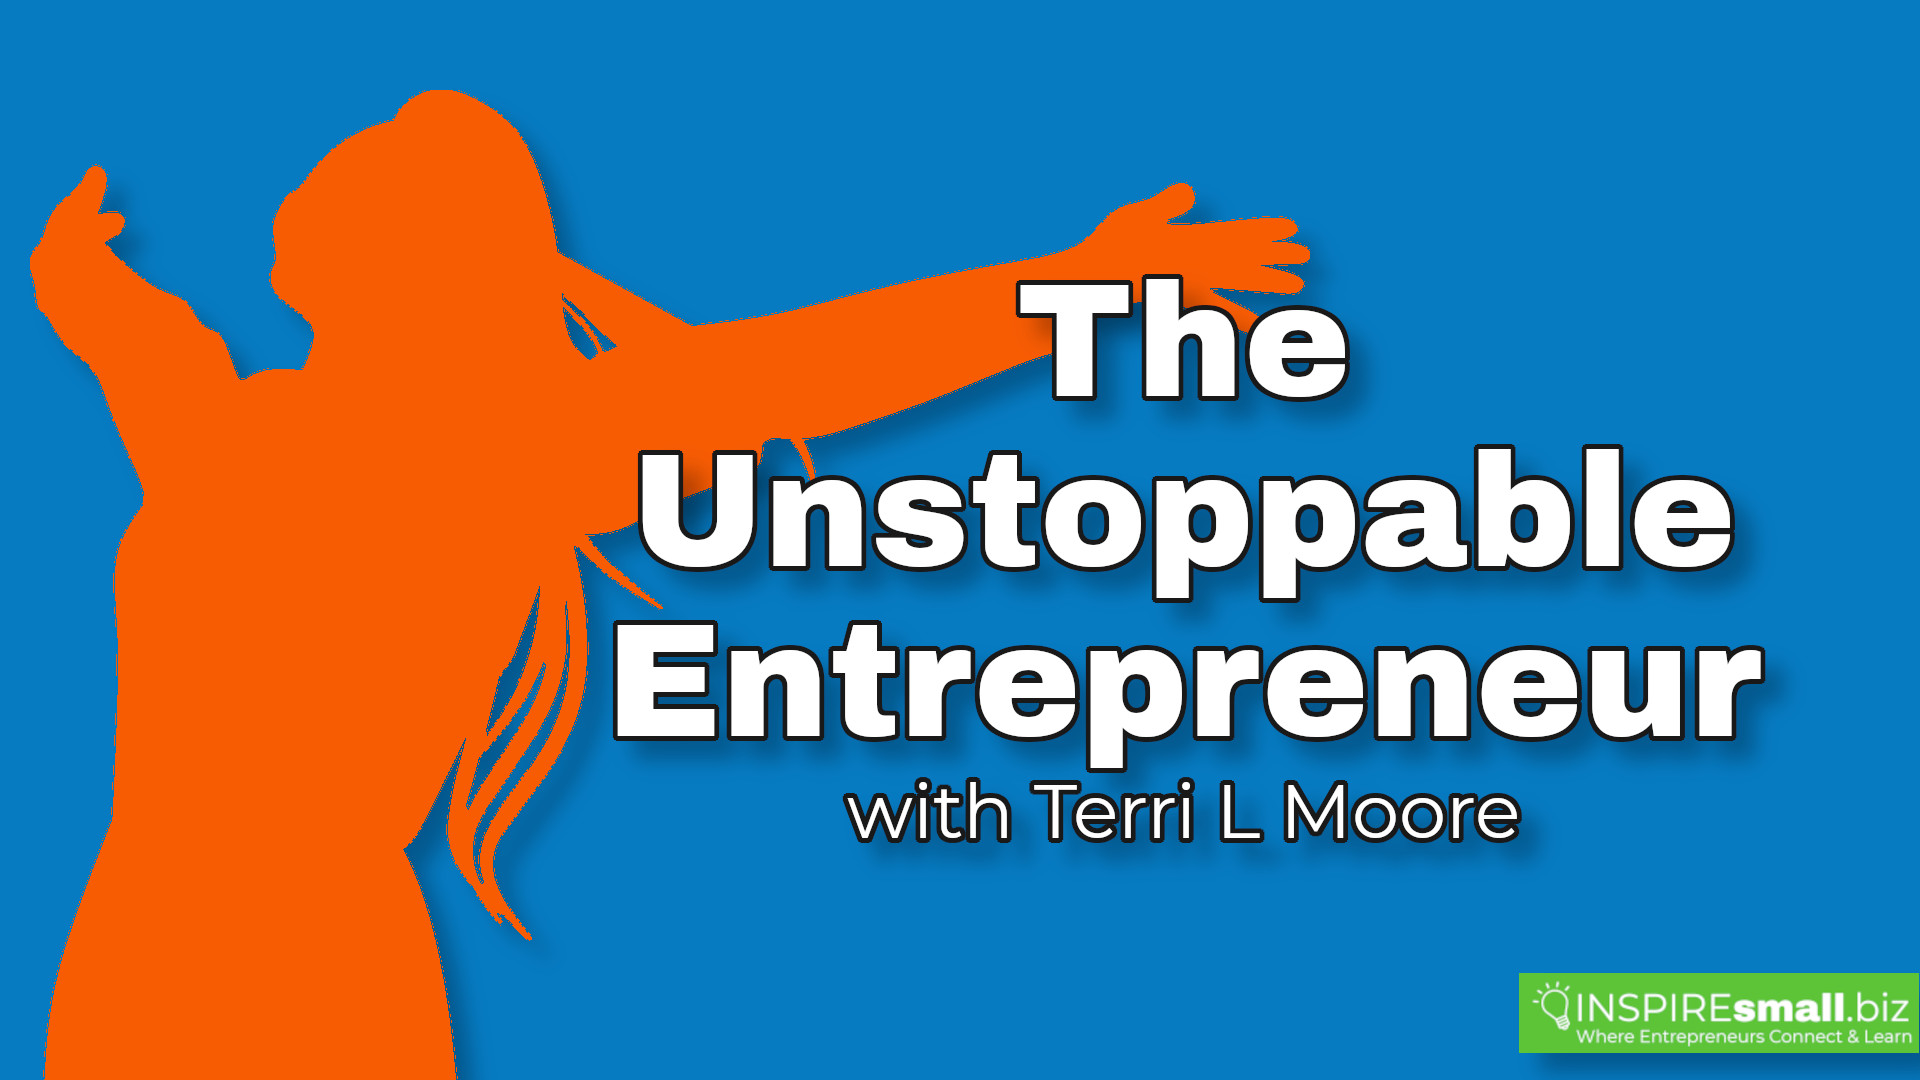 The Unstoppable Entreprenuer